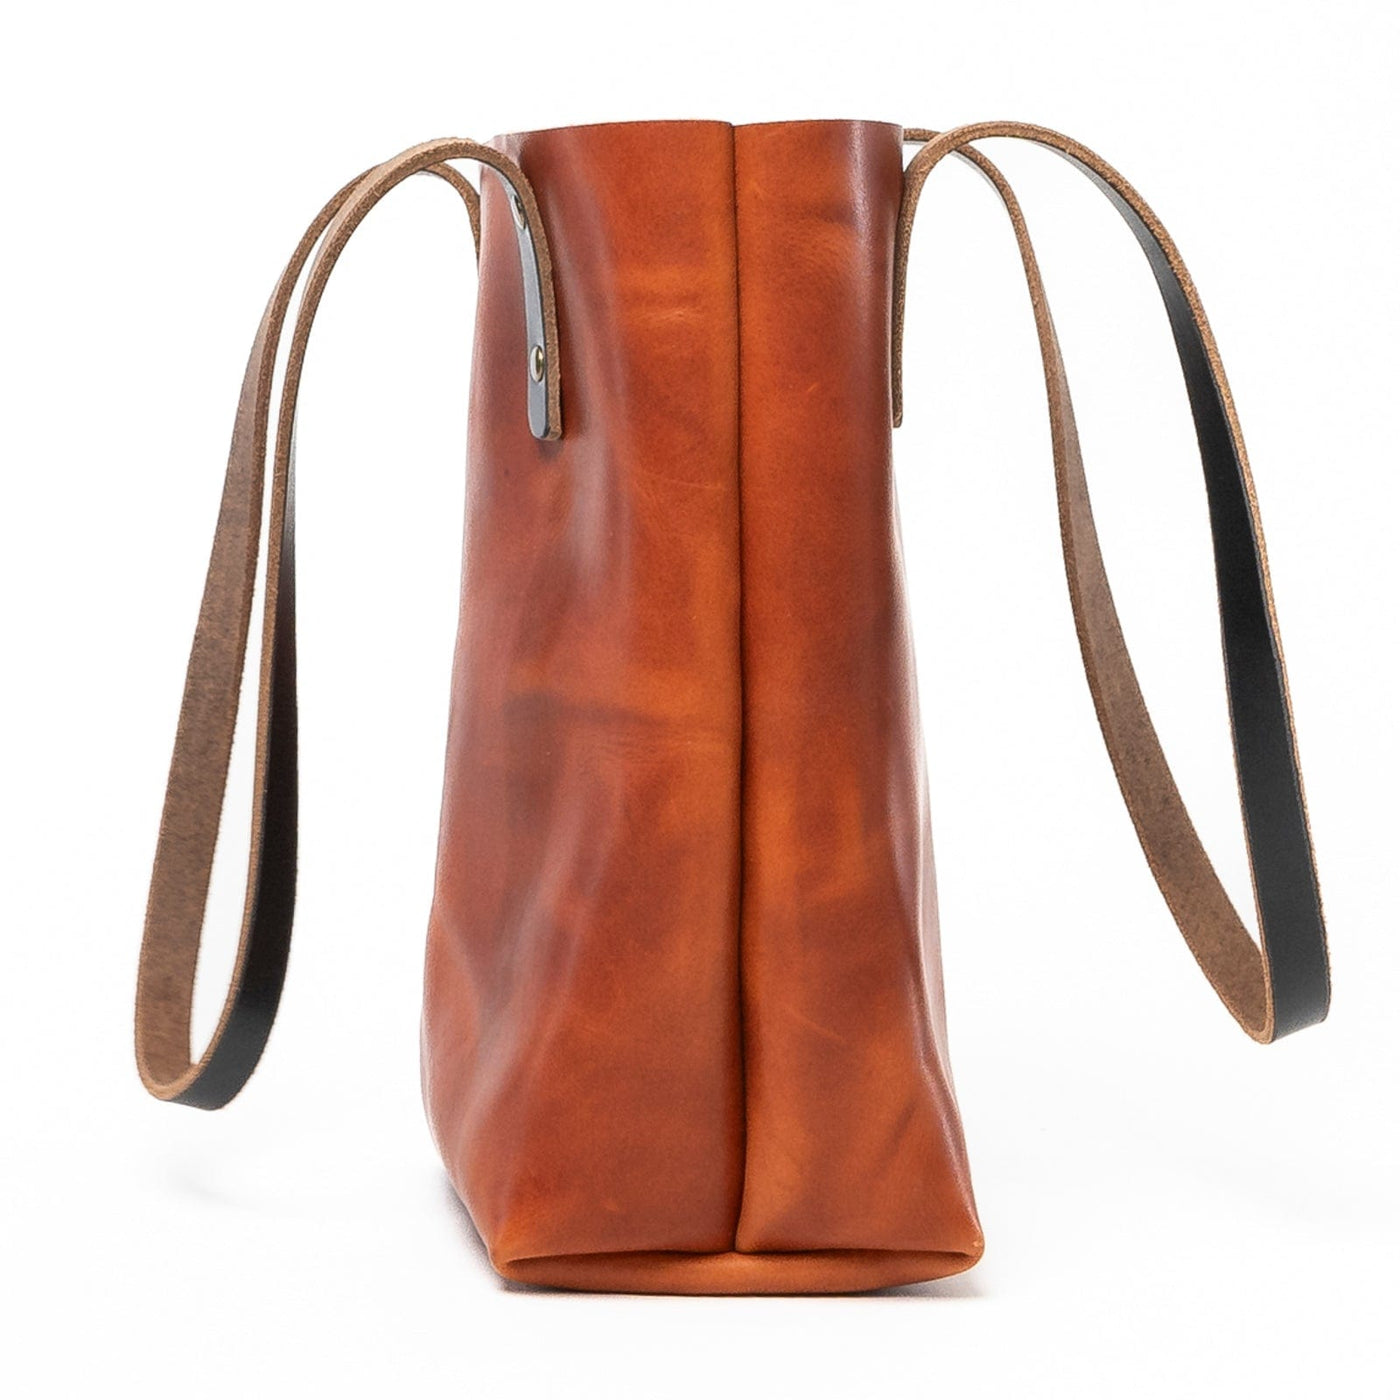 Leather Everyday Tote - English Tan Popov Leather